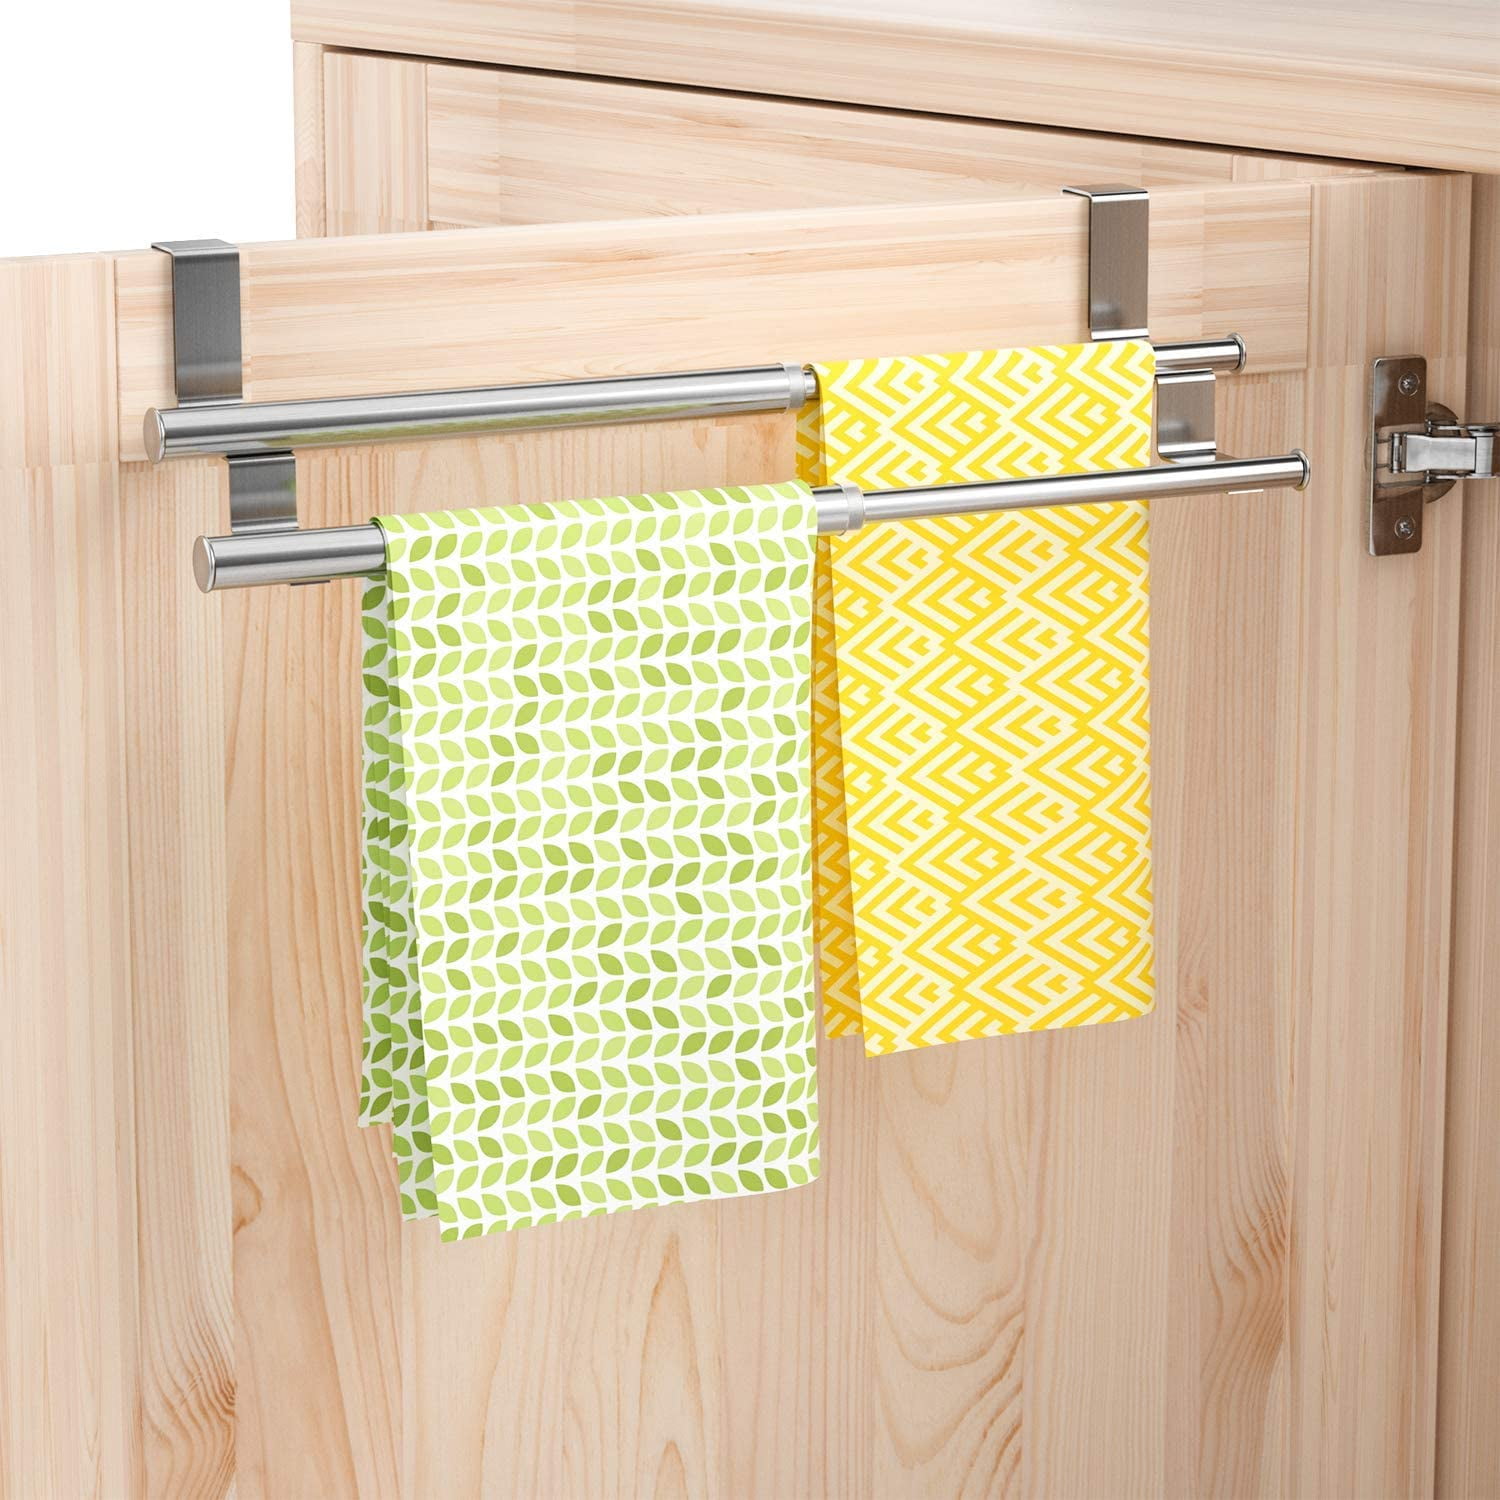 Stainless Steel Kitchen Towel Holder Over Cabinet Door Tea Towel Hanger Expandable & Double Towel Bar Rack for Universal Fit on Inside or Outside of Cupboard Doors 